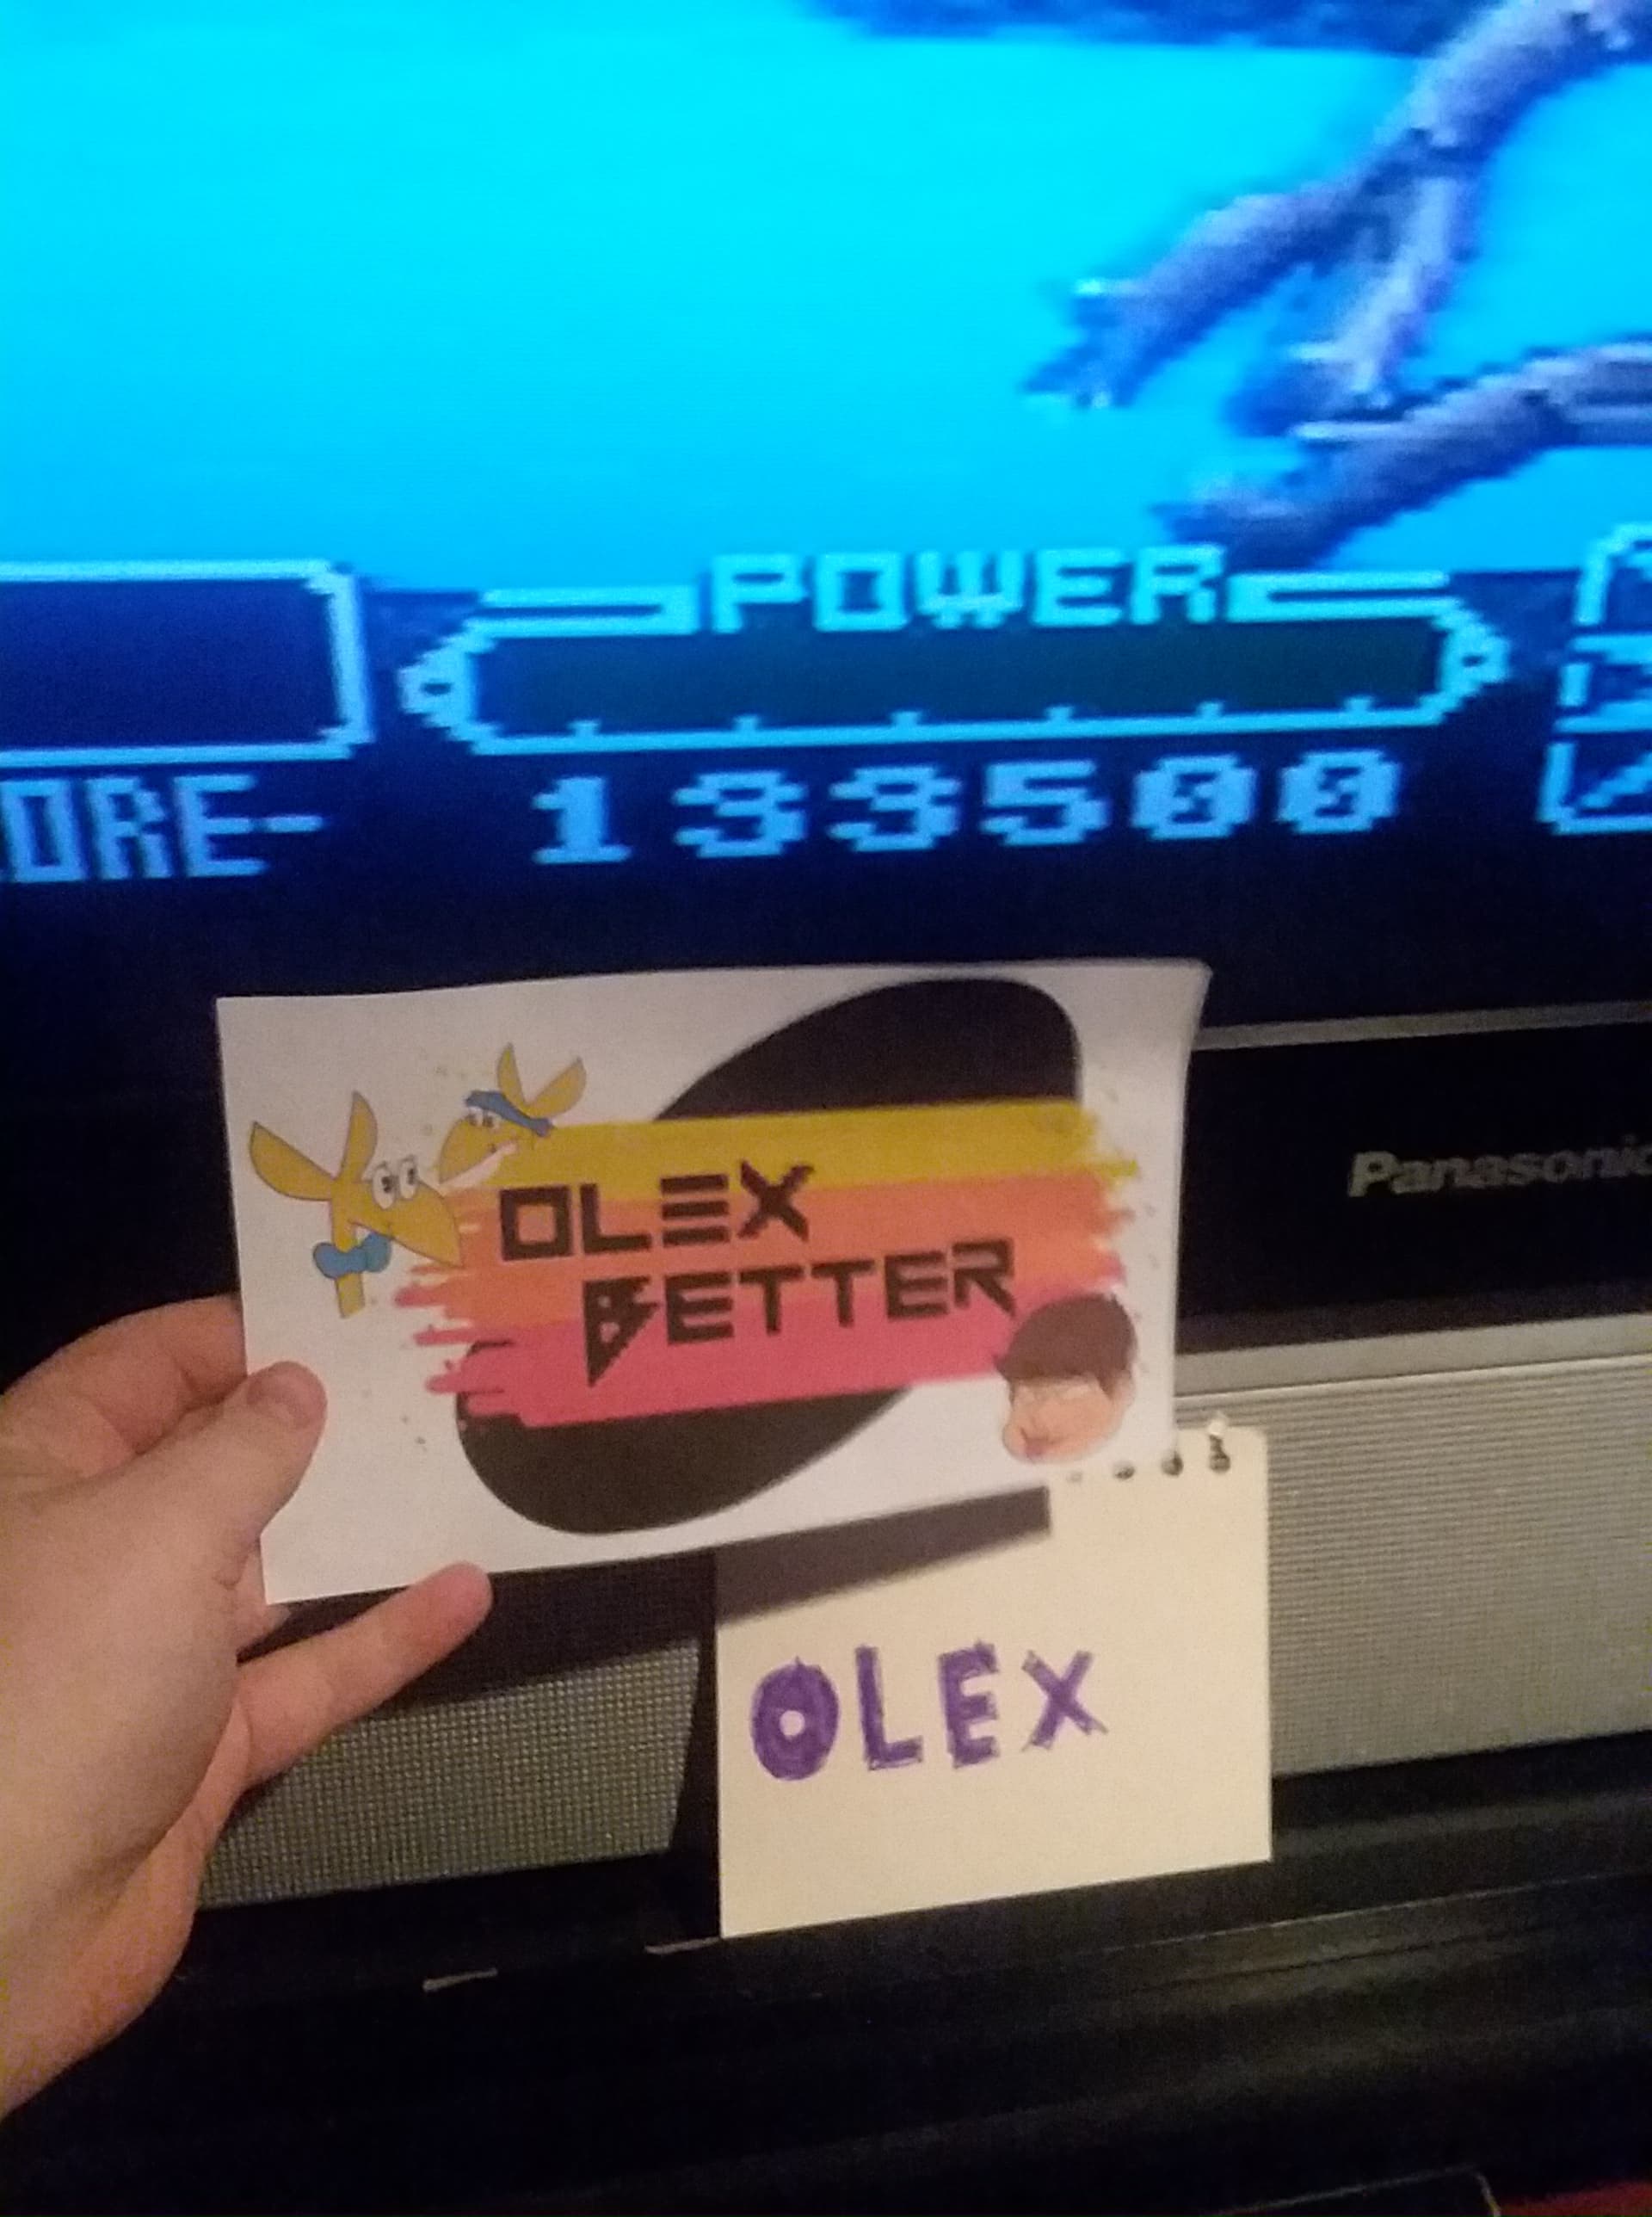 OlexBetter: Mighty Morphin Power Rangers: The Movie (SNES/Super Famicom) 133,500 points on 2018-02-15 16:38:26